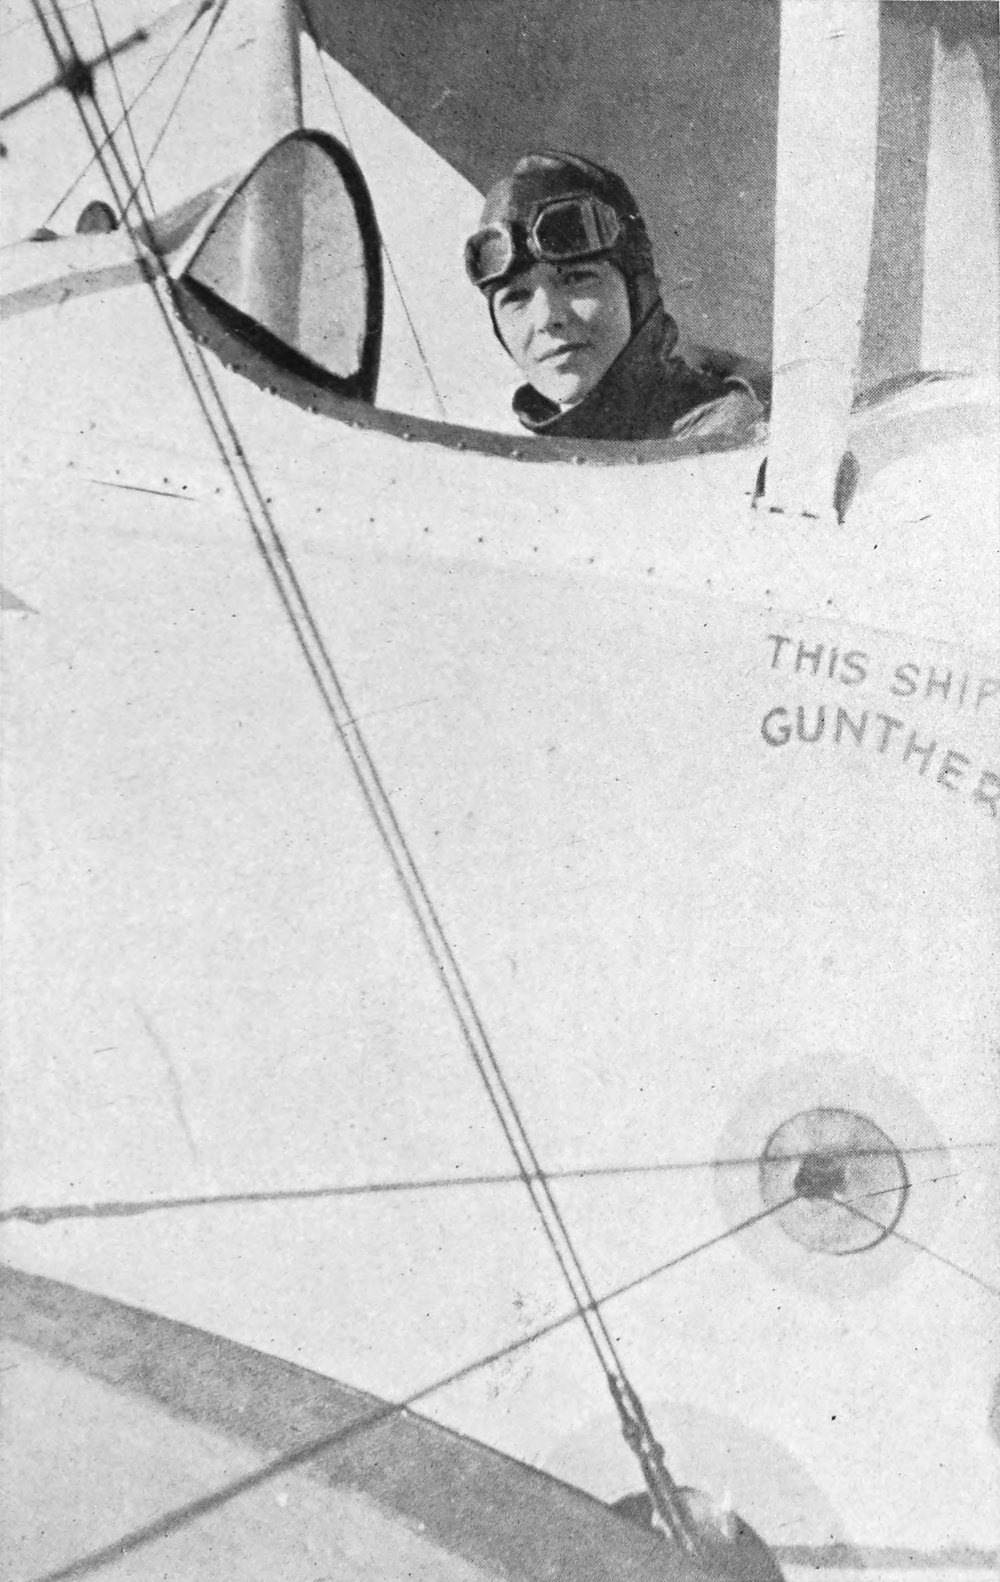 Photo medium shot of Earhart wearing flight gear looking out from a biplane